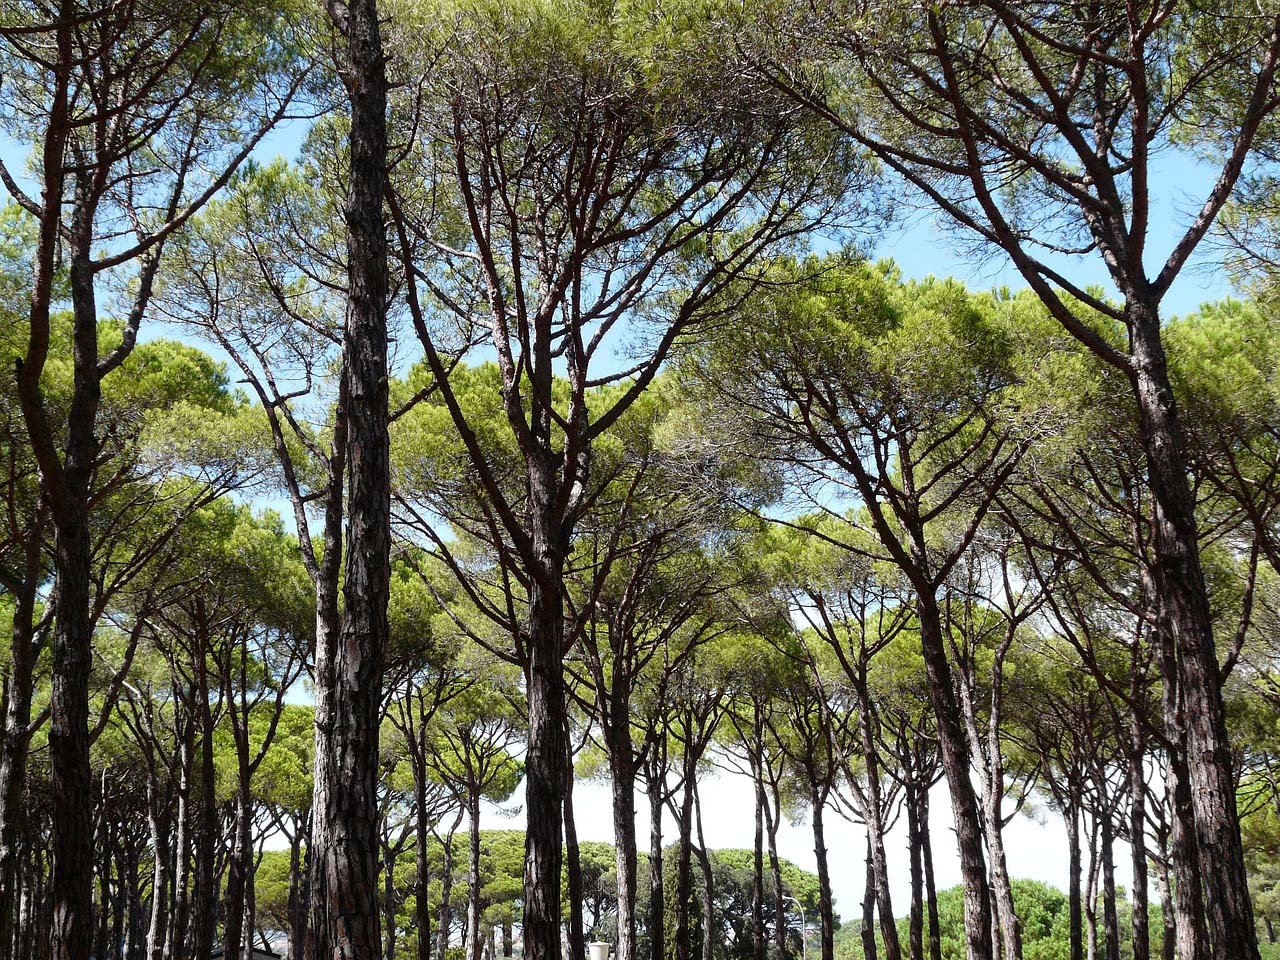 A moderately dense pinewood forest sits in front of a blue sky.